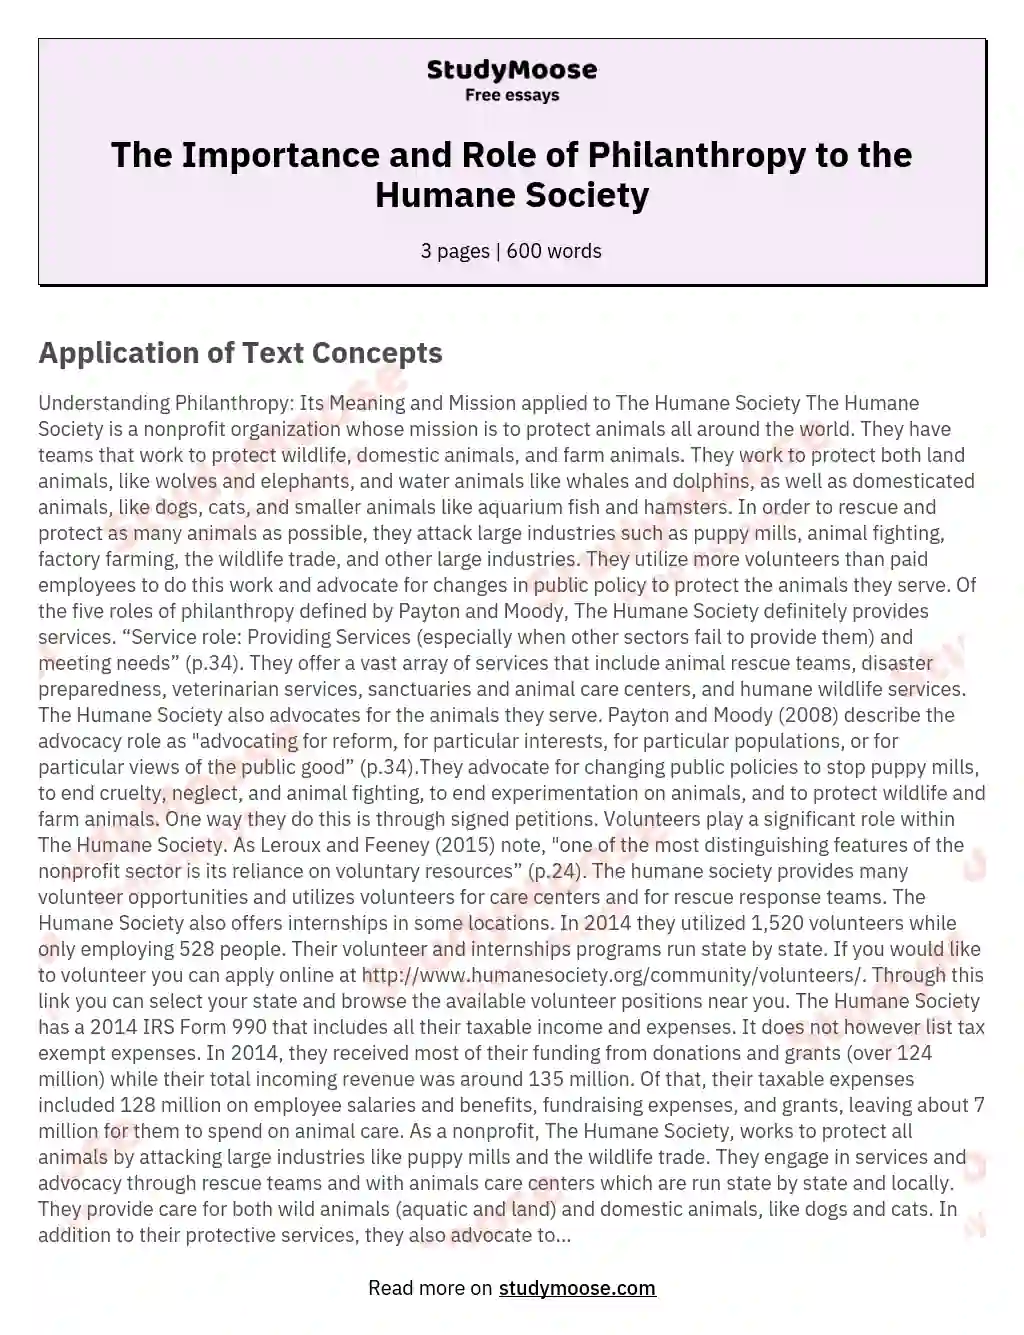 The Importance and Role of Philanthropy to the Humane Society essay